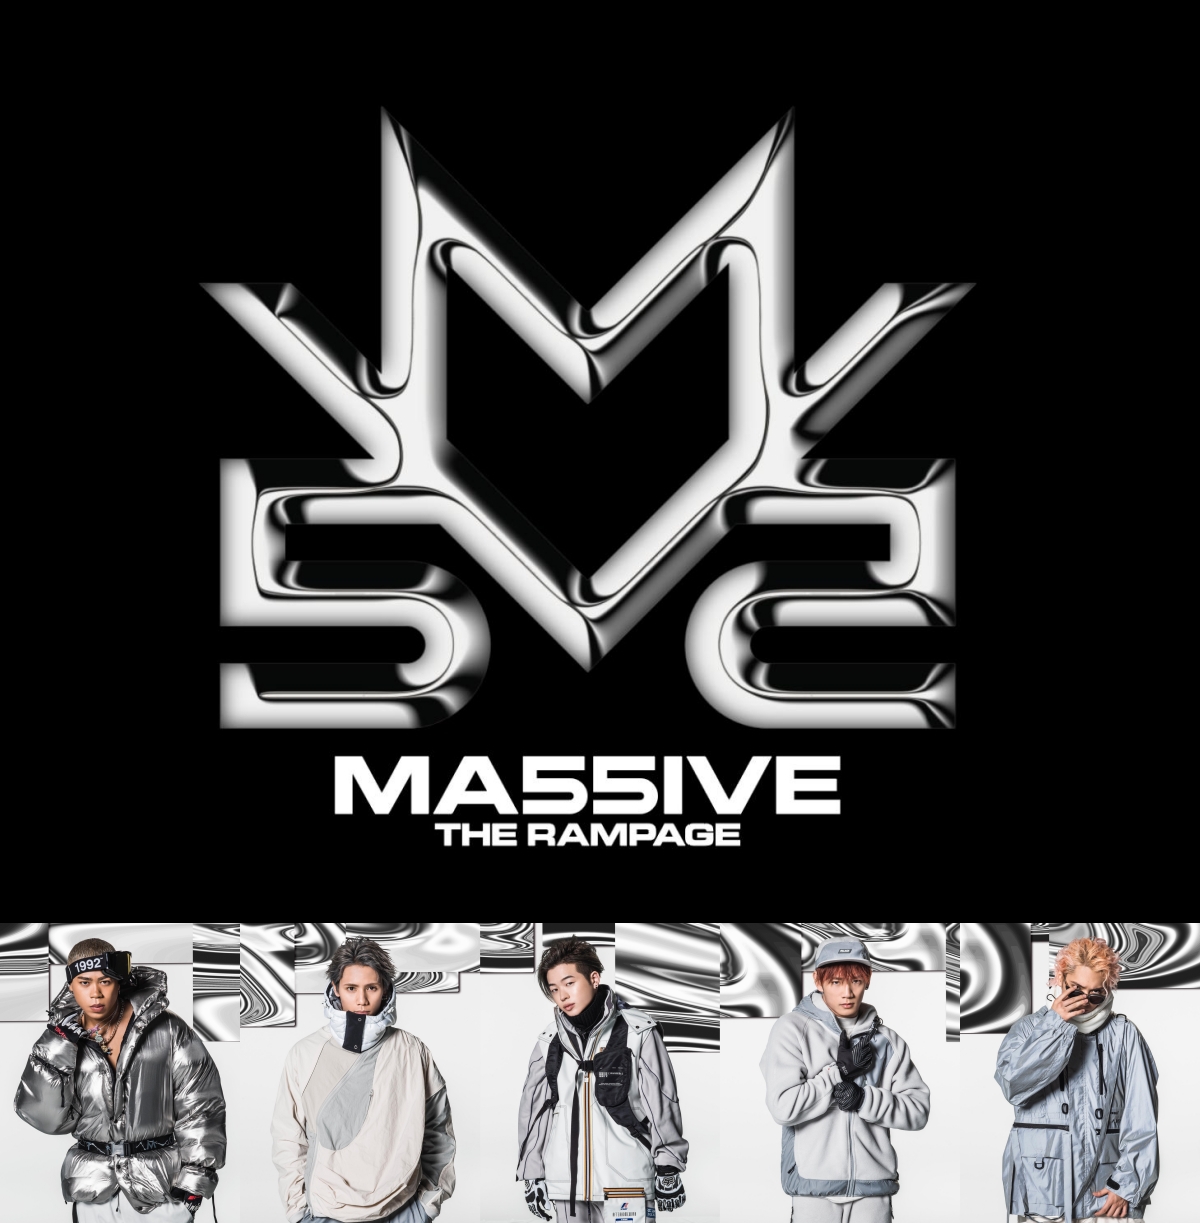 THE RAMPAGEパフォーマー5名によるHIPHOPグループ「MA55IVE THE 